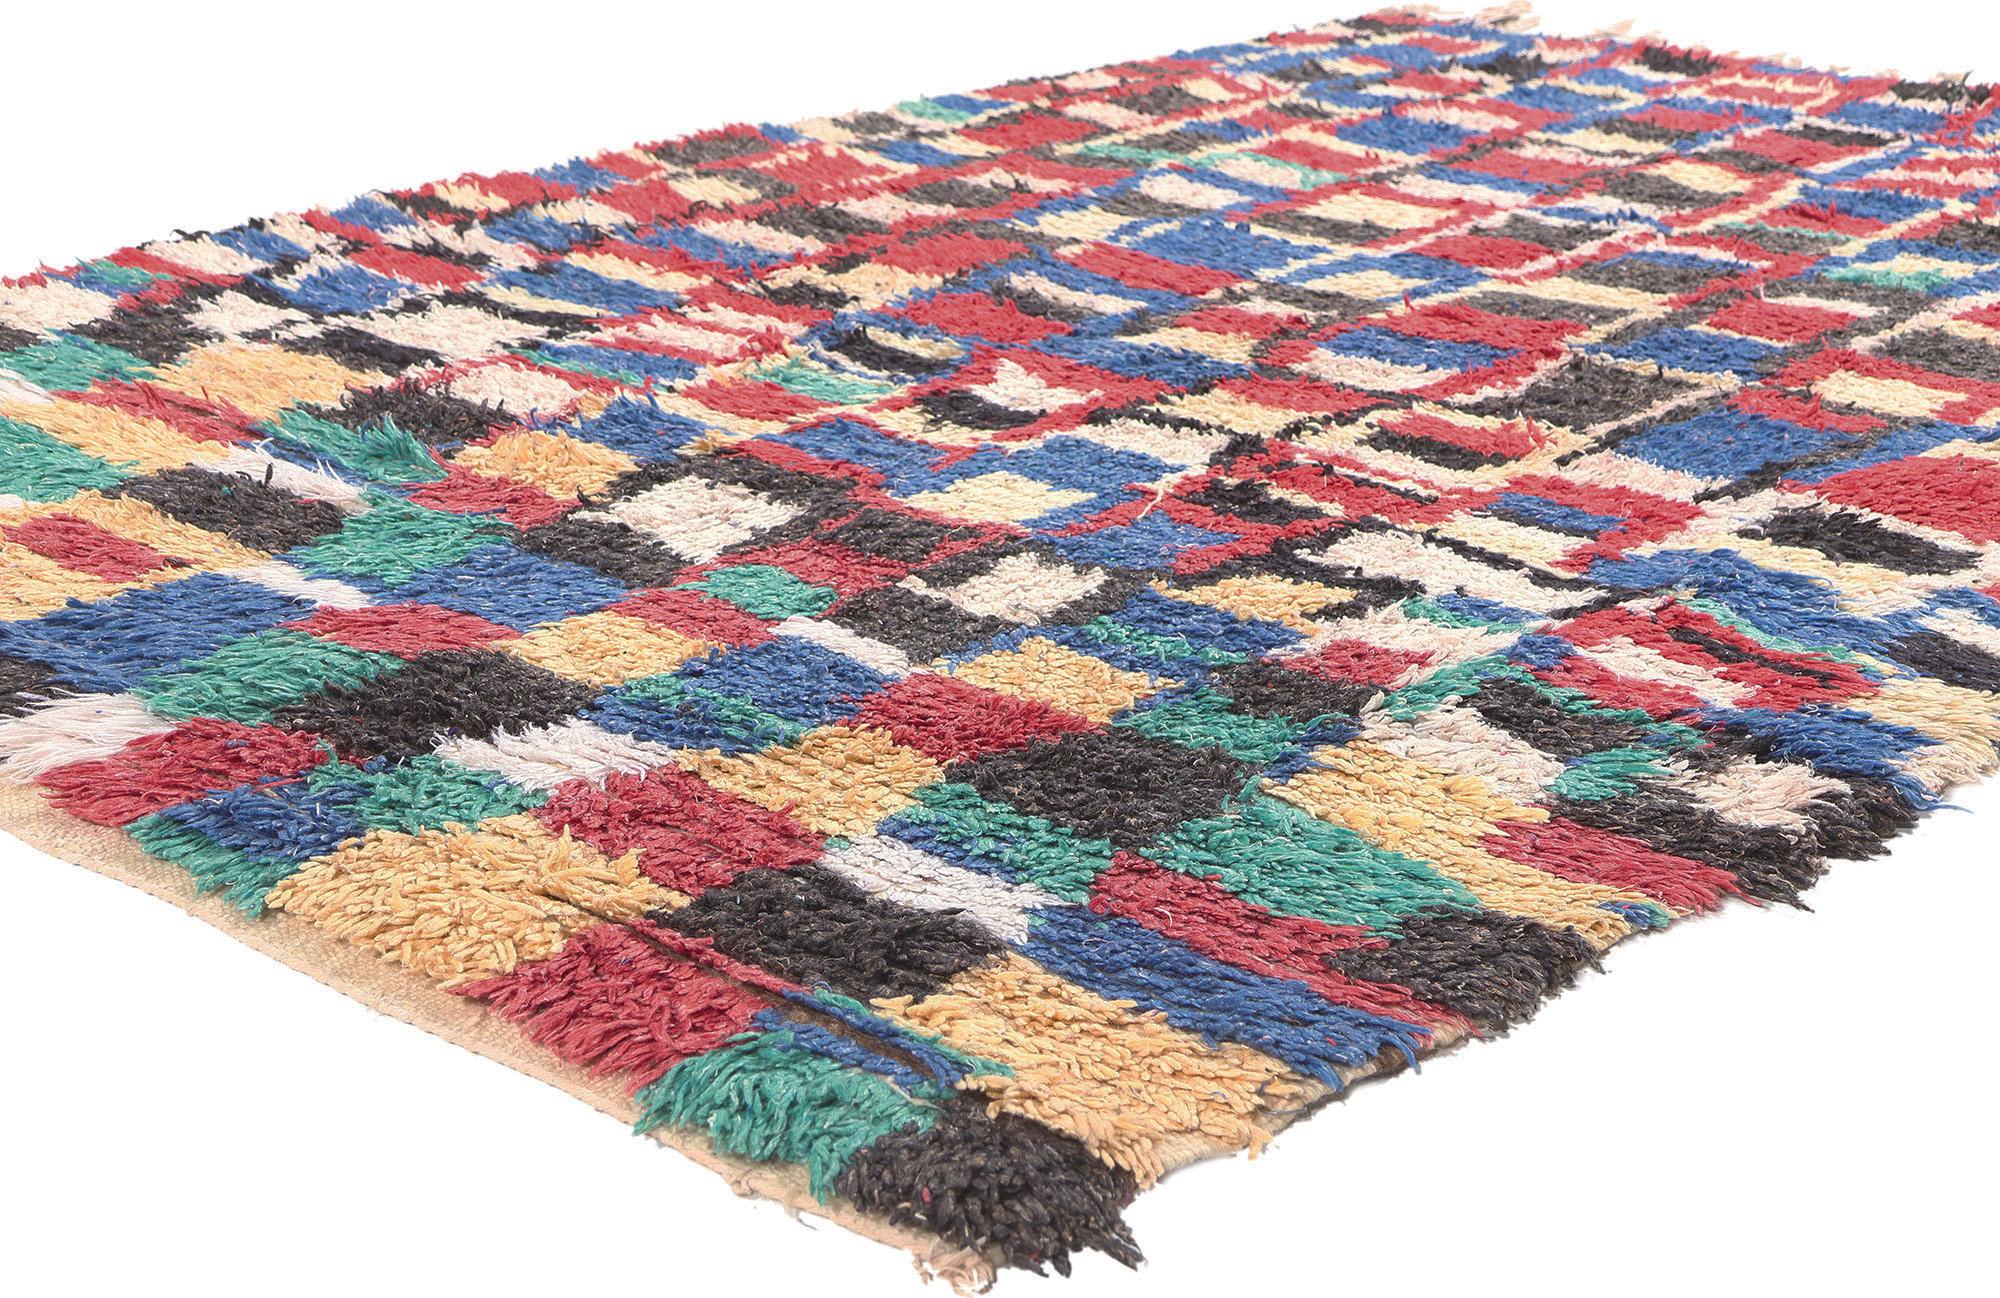 20405 Vintage Boujad Moroccan Rug, 04'09 x 07'00.
Step into the world of vibrant design with Boujad rugs, renowned for their geometric patterns and bold hues. Typically woven in bright shades, Boujad Moroccan rugs are perfect for infusing nearly any